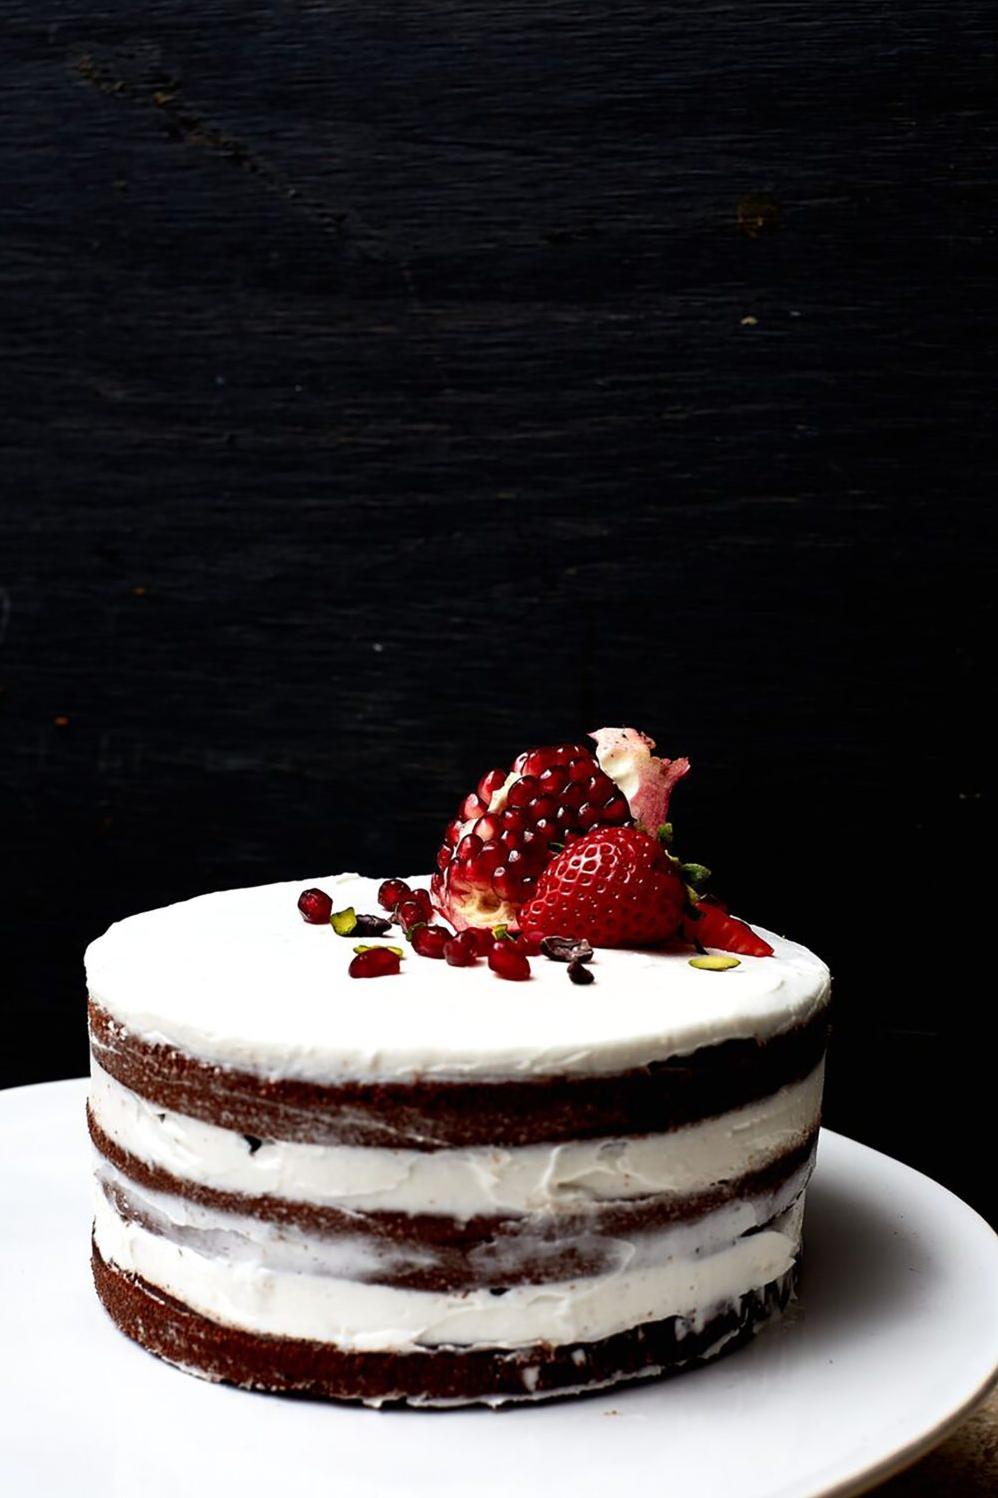  If you want to impress your guests with a gluten-free dessert, this cake is a must-try.